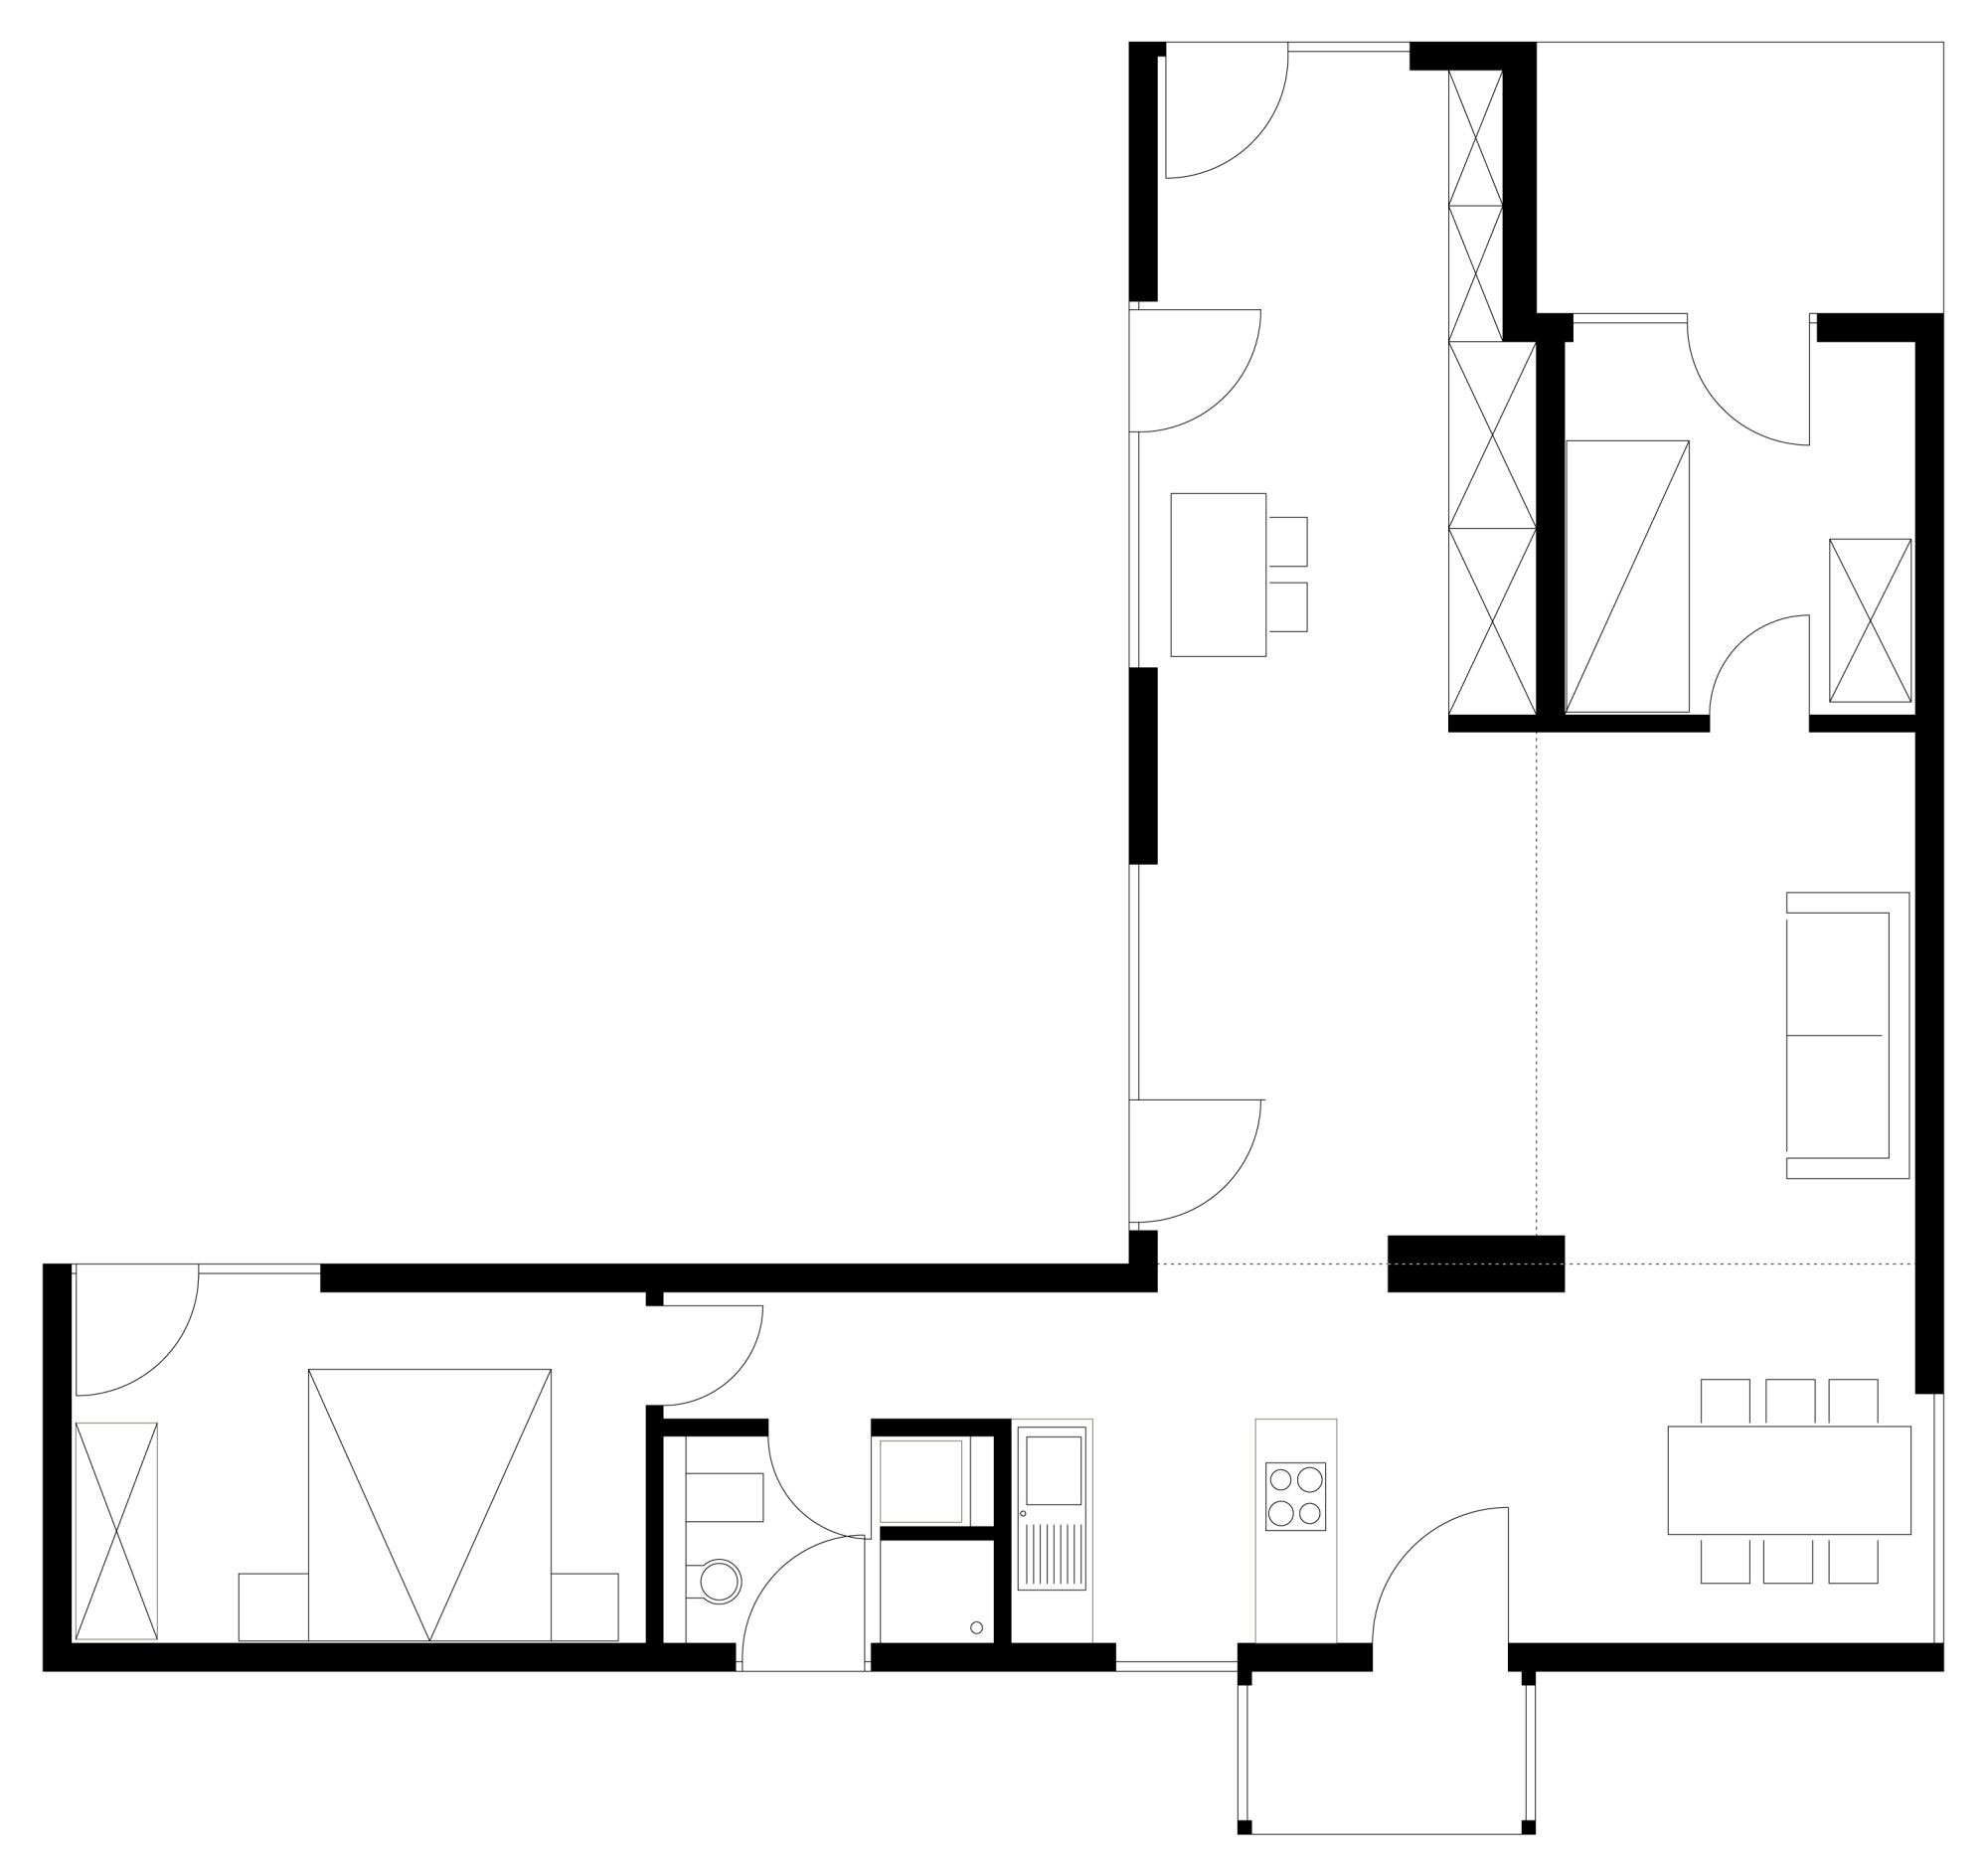 Floor Plan, Container House in Kall, Germany